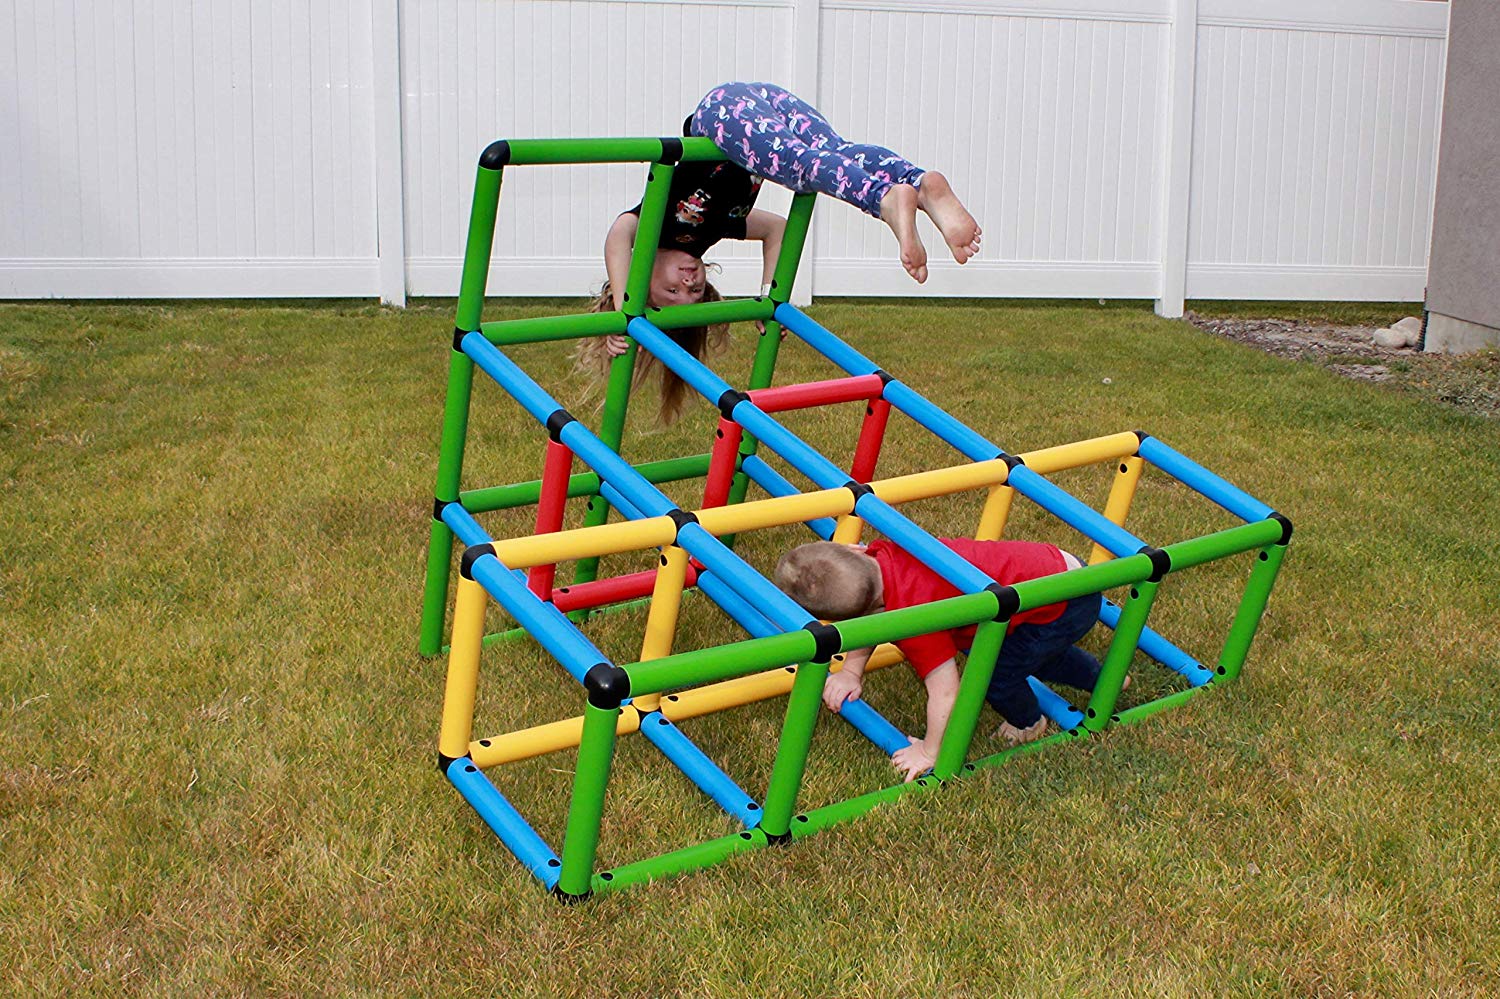 Funphix Climbing Gyms Stem Learning Colorful Buildable Indoor Outdoor Play Structure for Kids Aged 2-12 Years